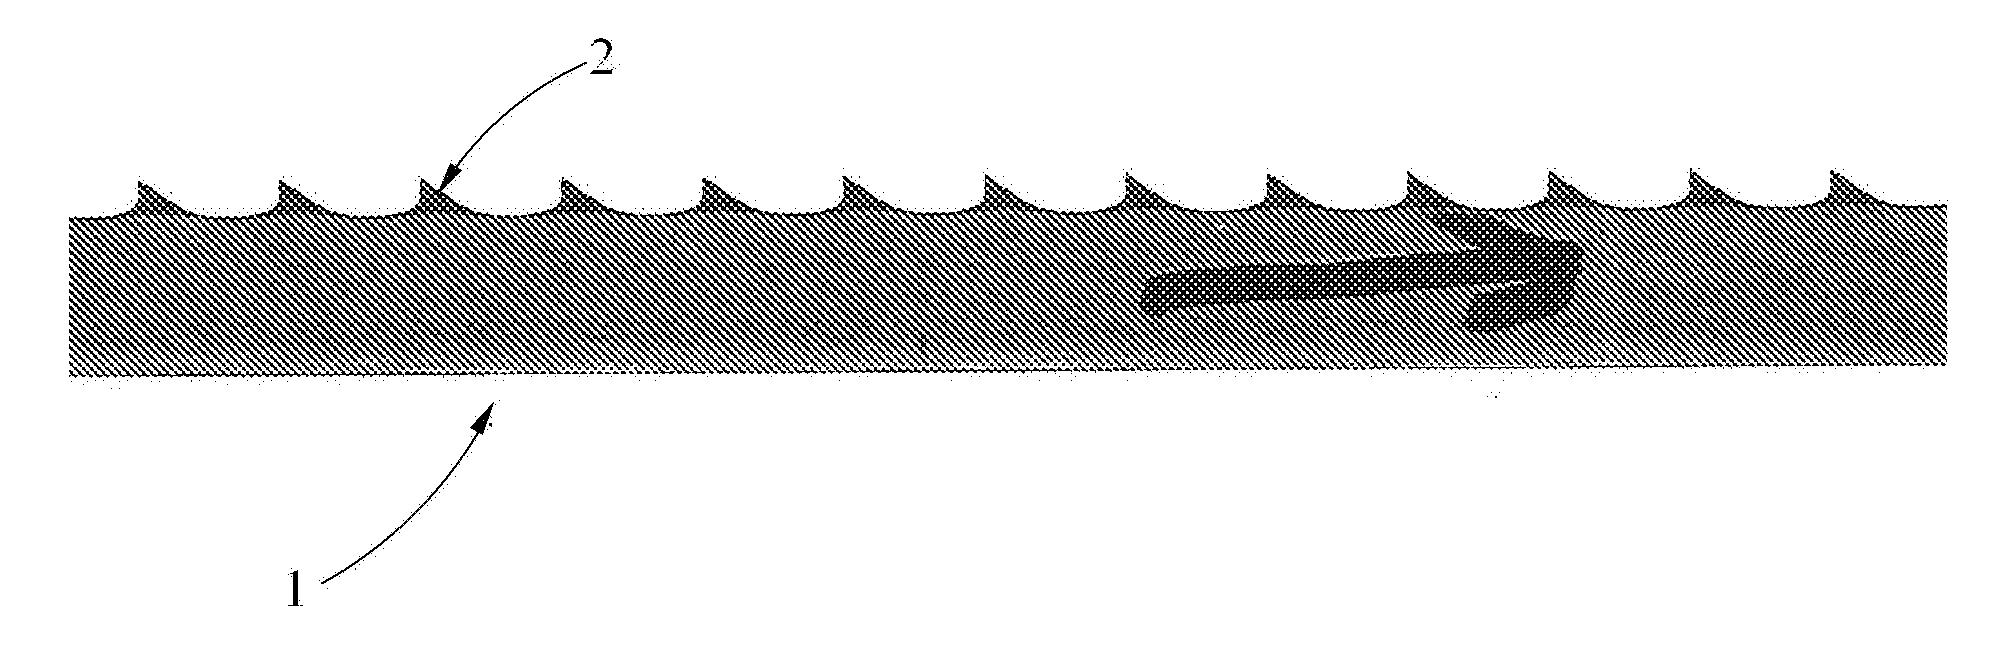 Bread-Knife Blade and a Method for Its Manufacture